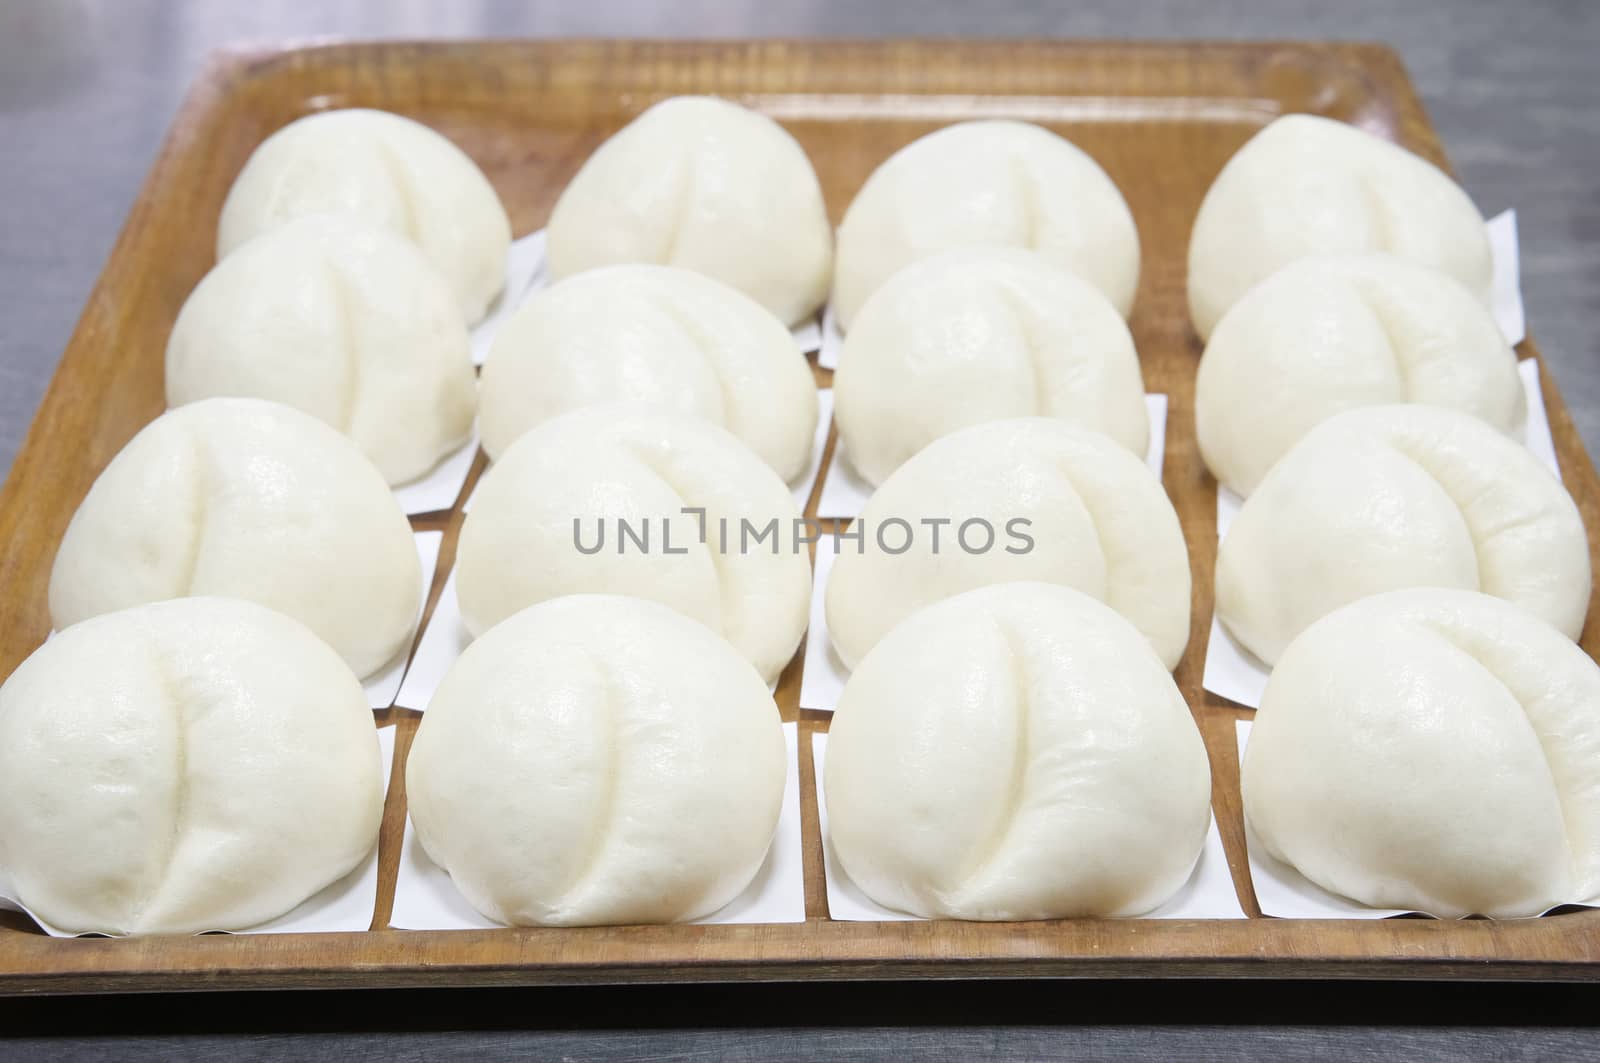 Steamed bun put in a row on wooden tray by eaglesky